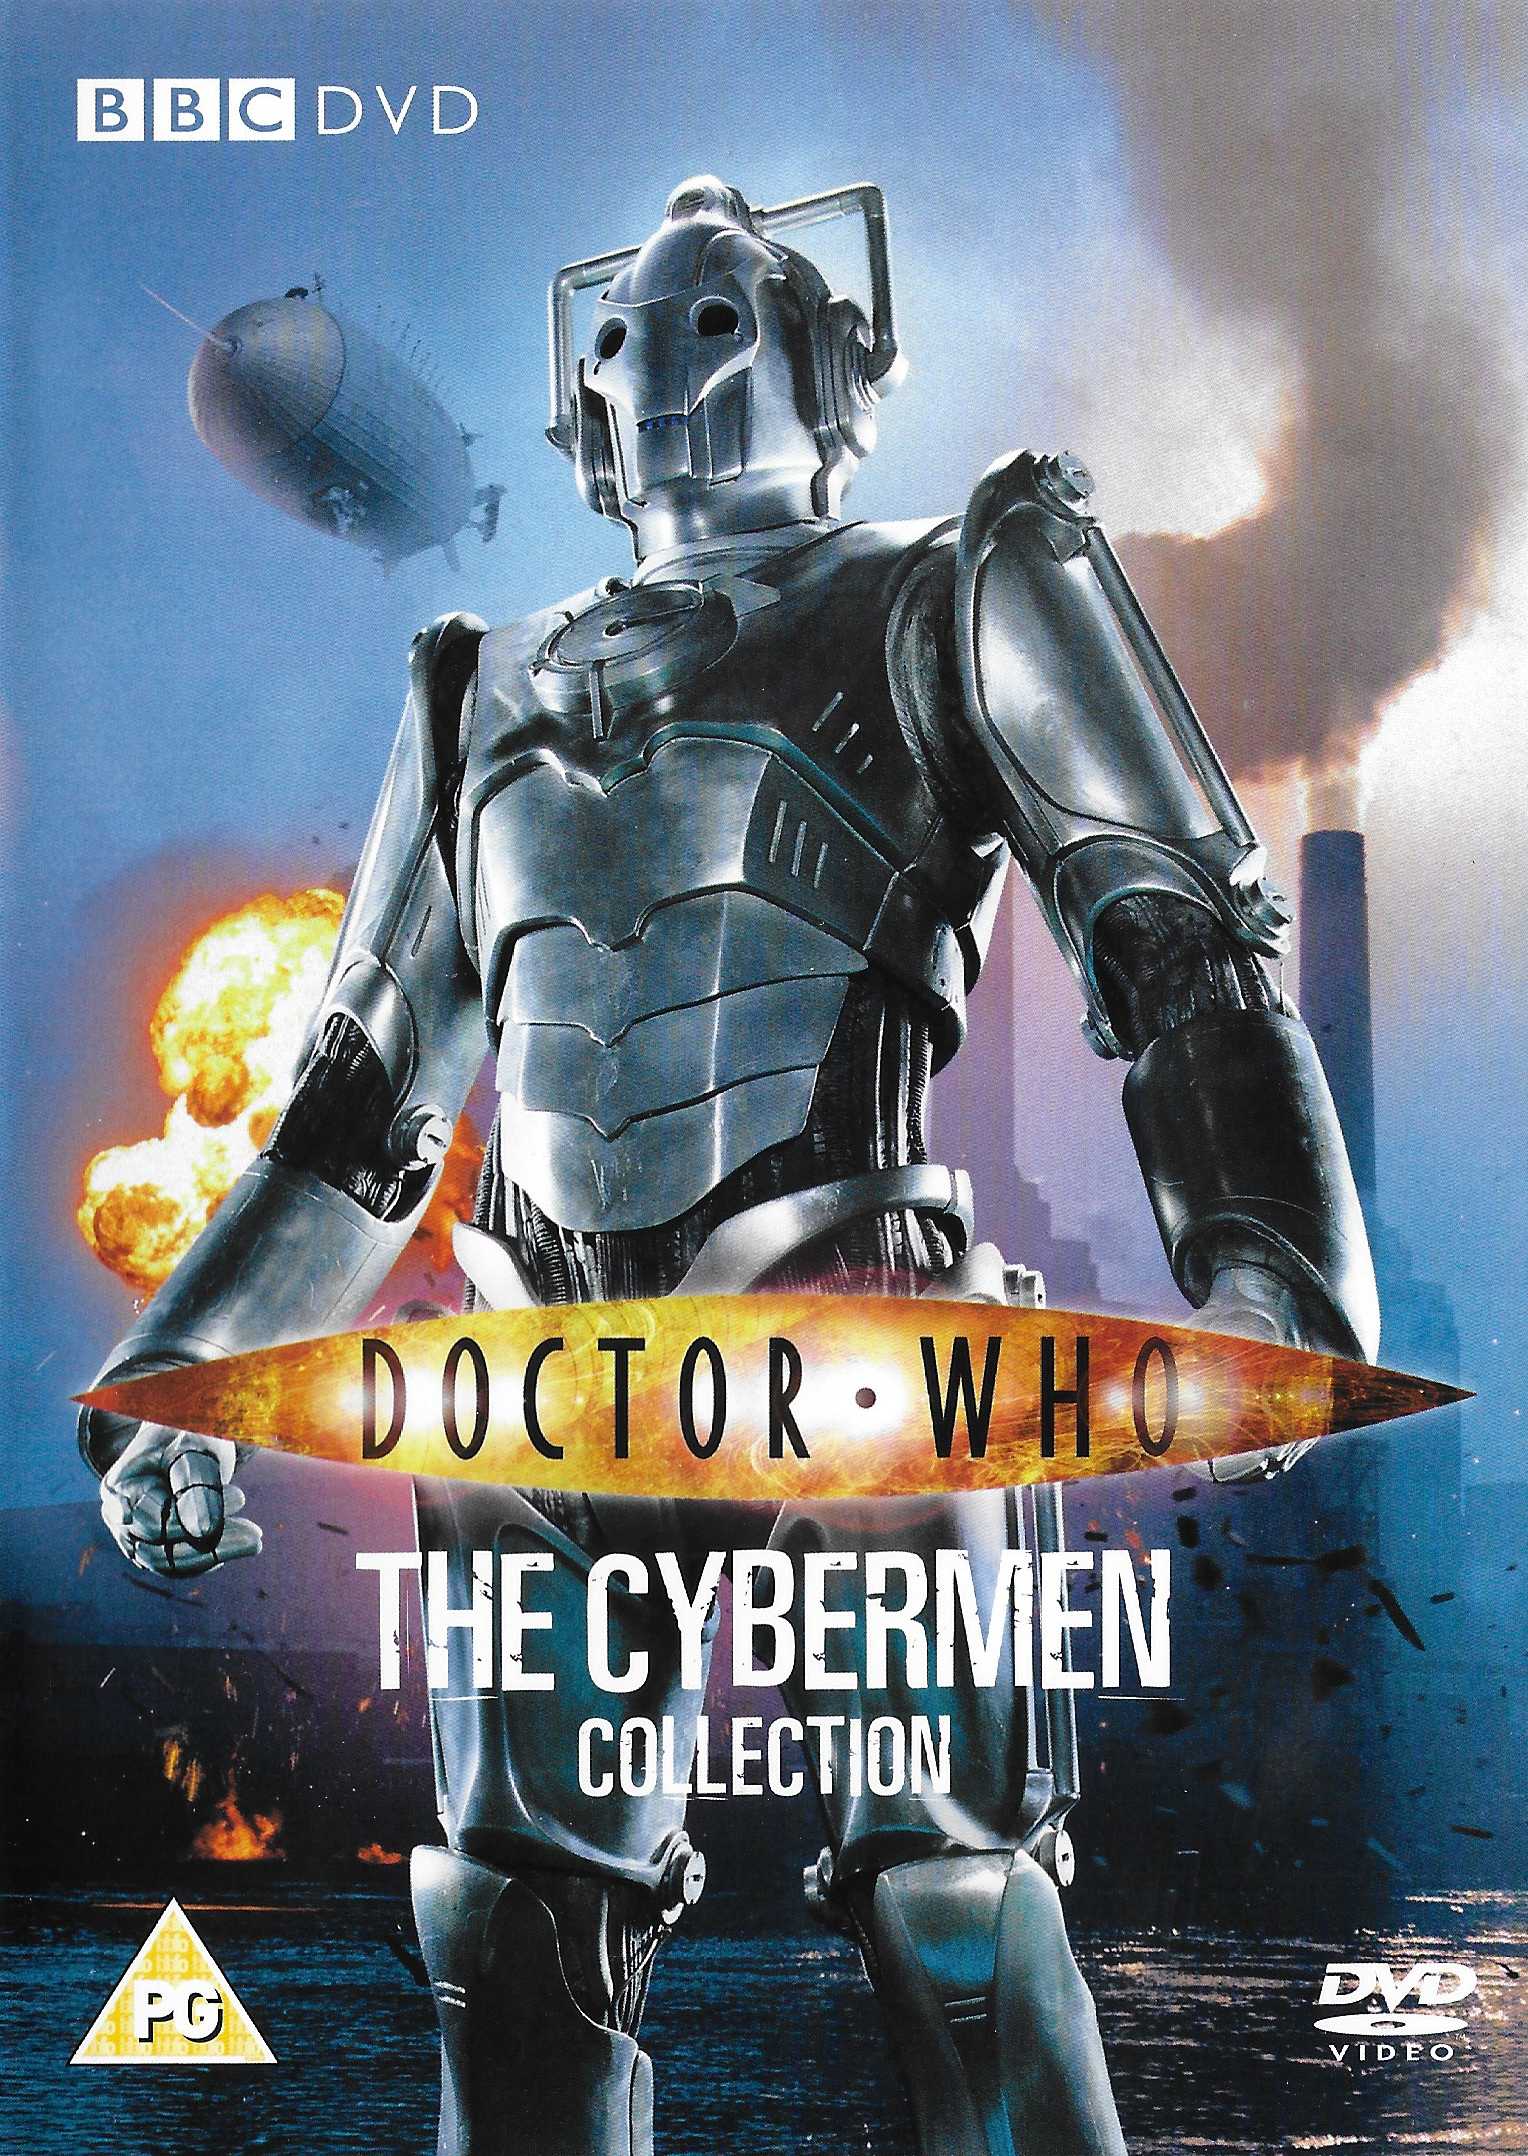 Picture of BBCDVD 2905 Doctor Who - The Cyberman collection by artist Tom MacRae / Russell T Davies from the BBC dvds - Records and Tapes library